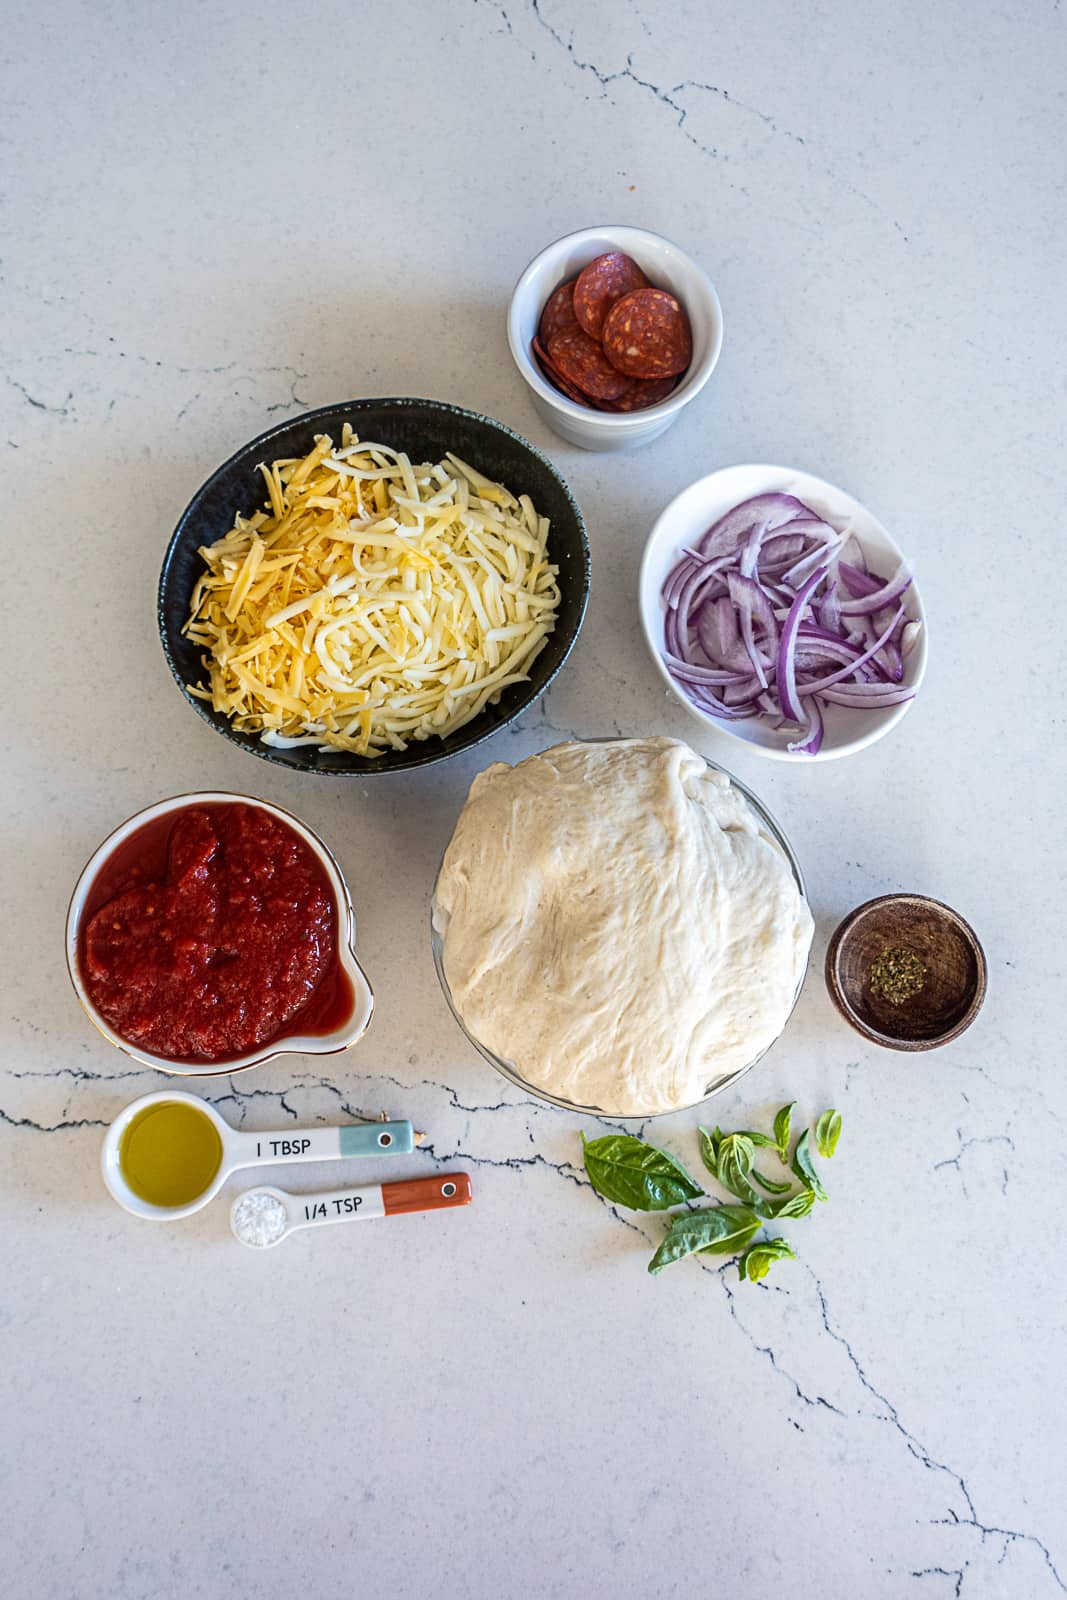 Prepped Ingredients for Cast Iron Pizza on a Counter